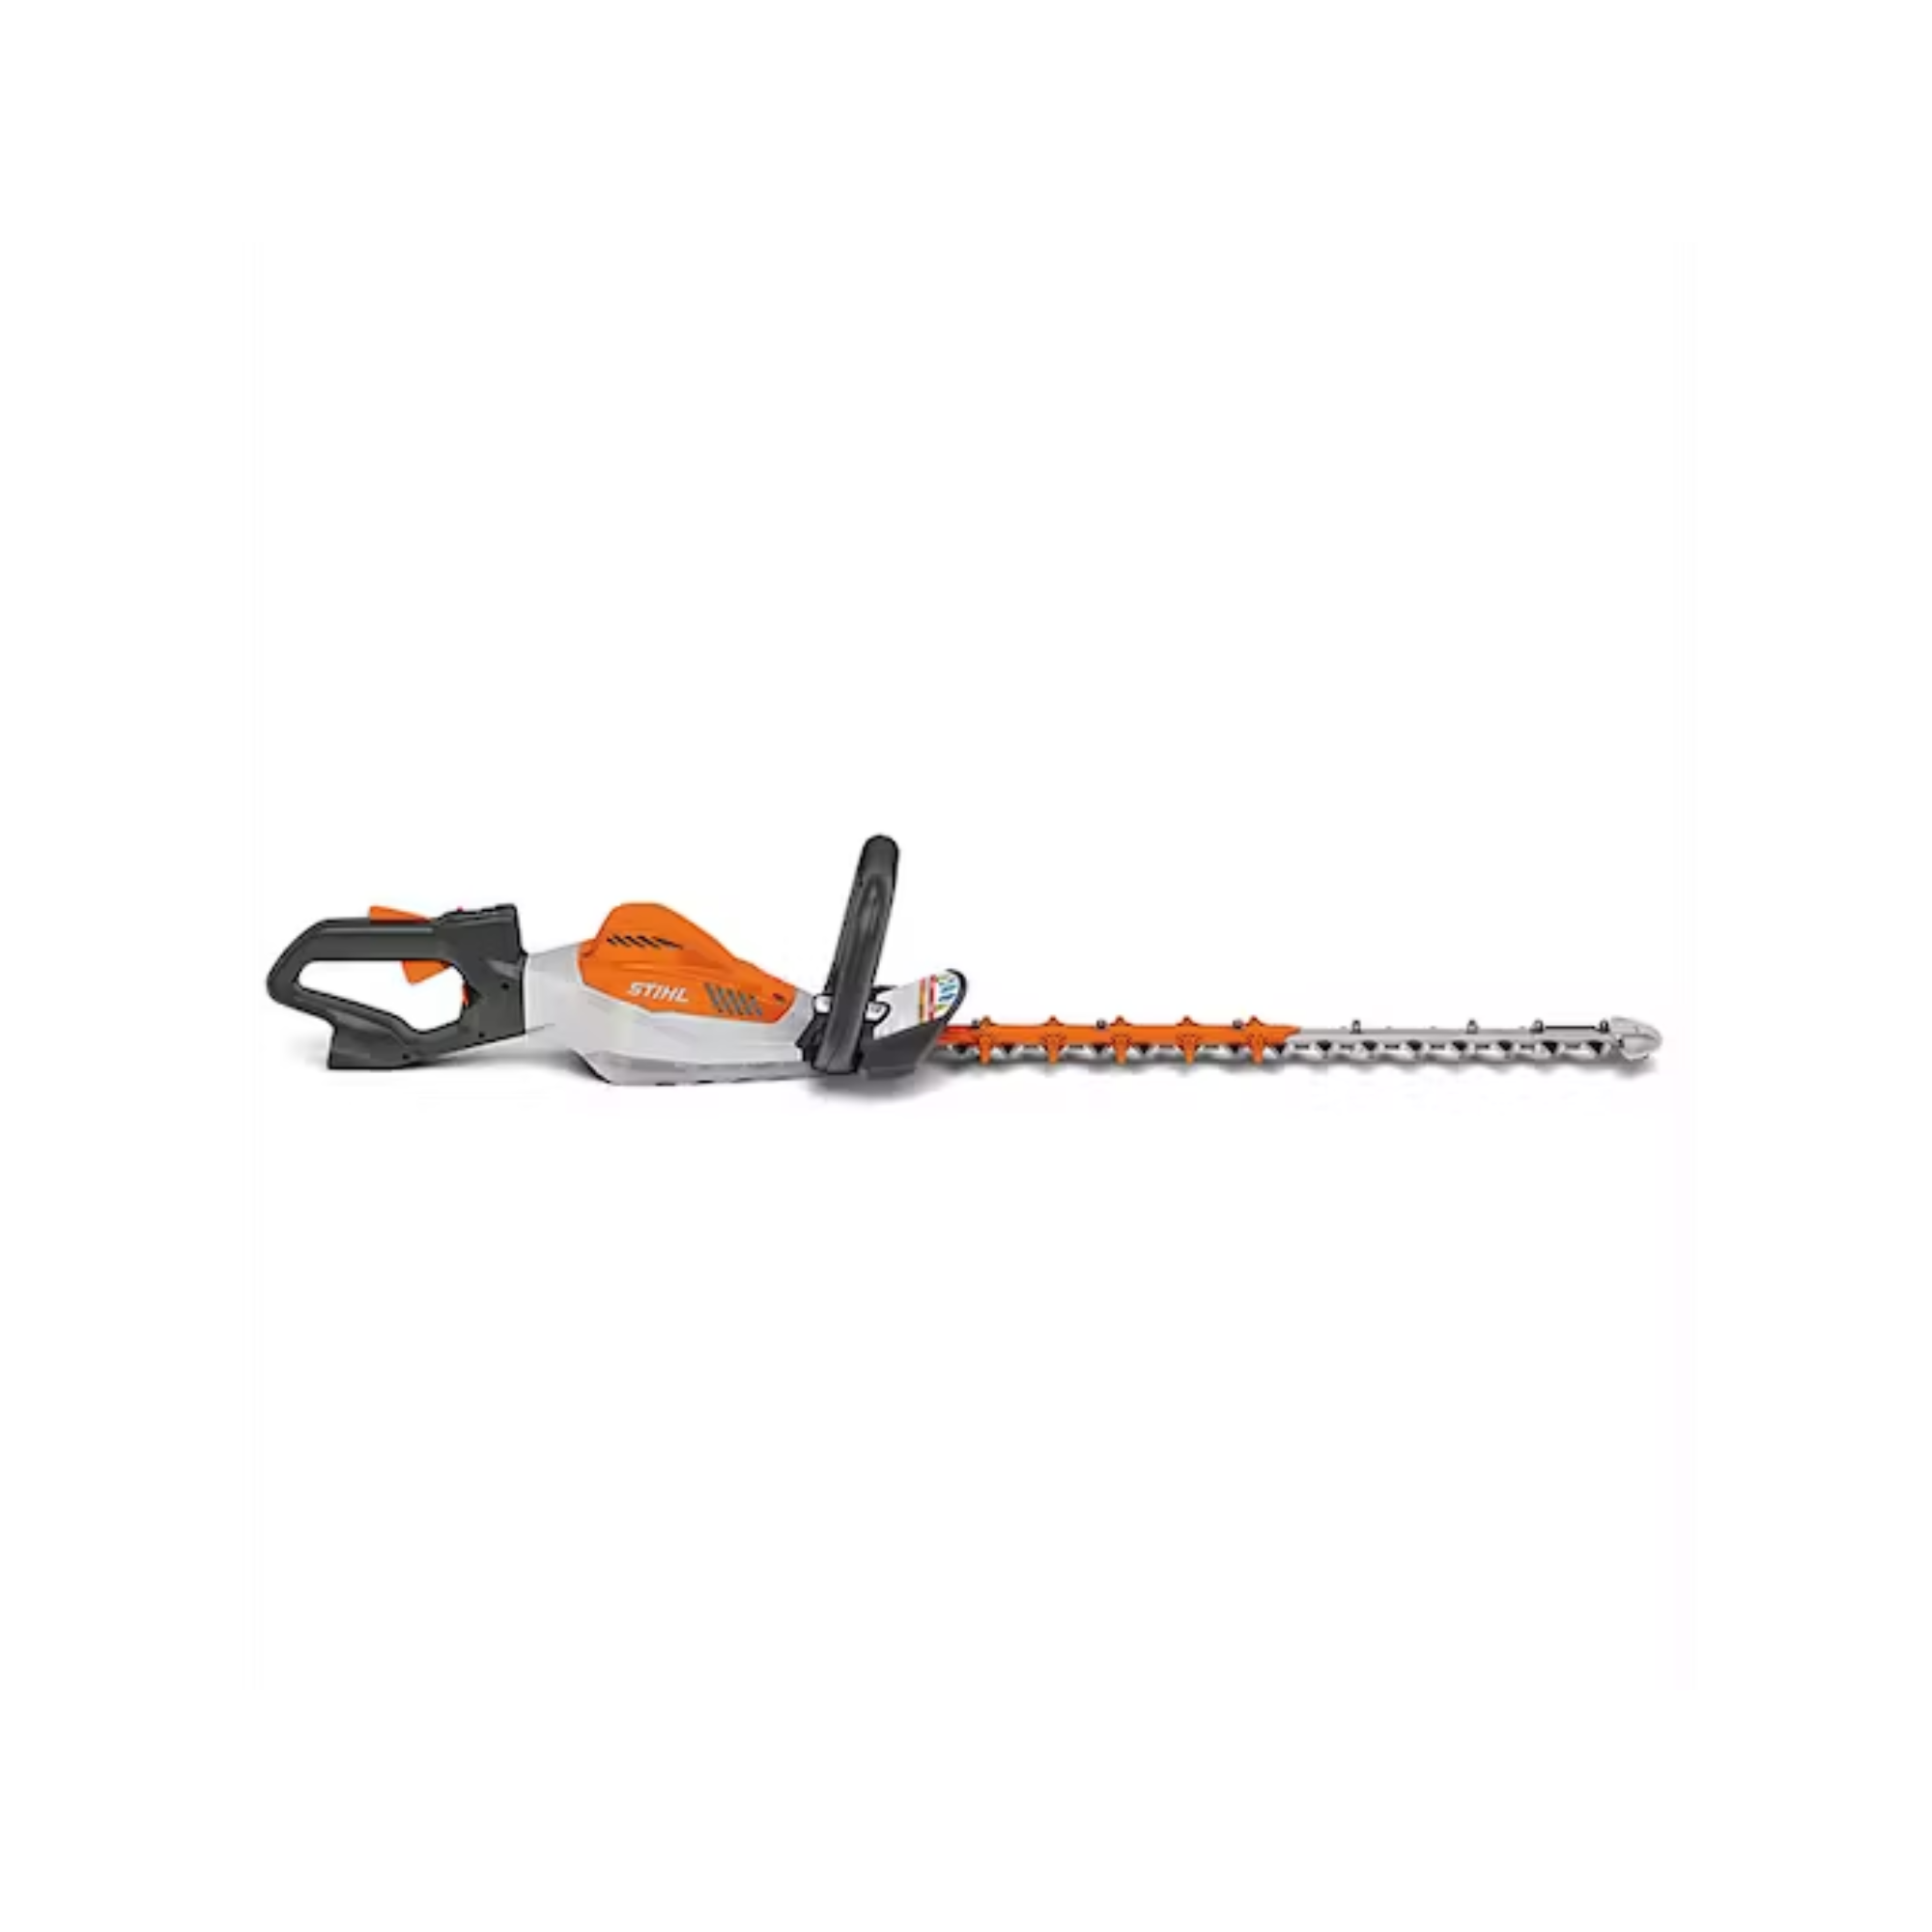 HSA 94 R Battery Powered Hedge Trimmer 24" | Tool Only